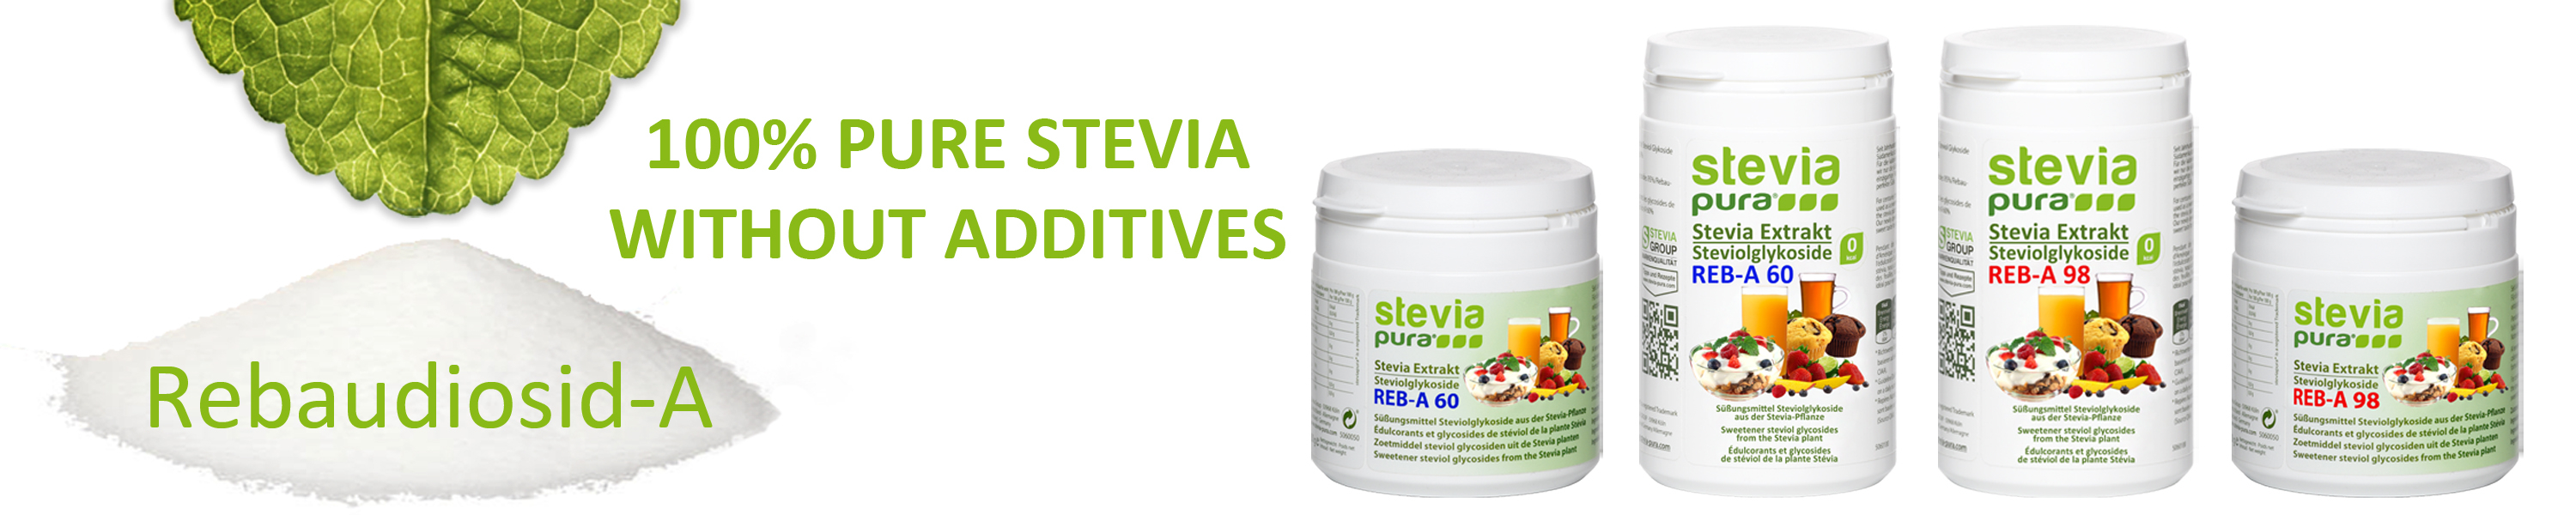 Shop 100% Pure Stevia Powder without additives...